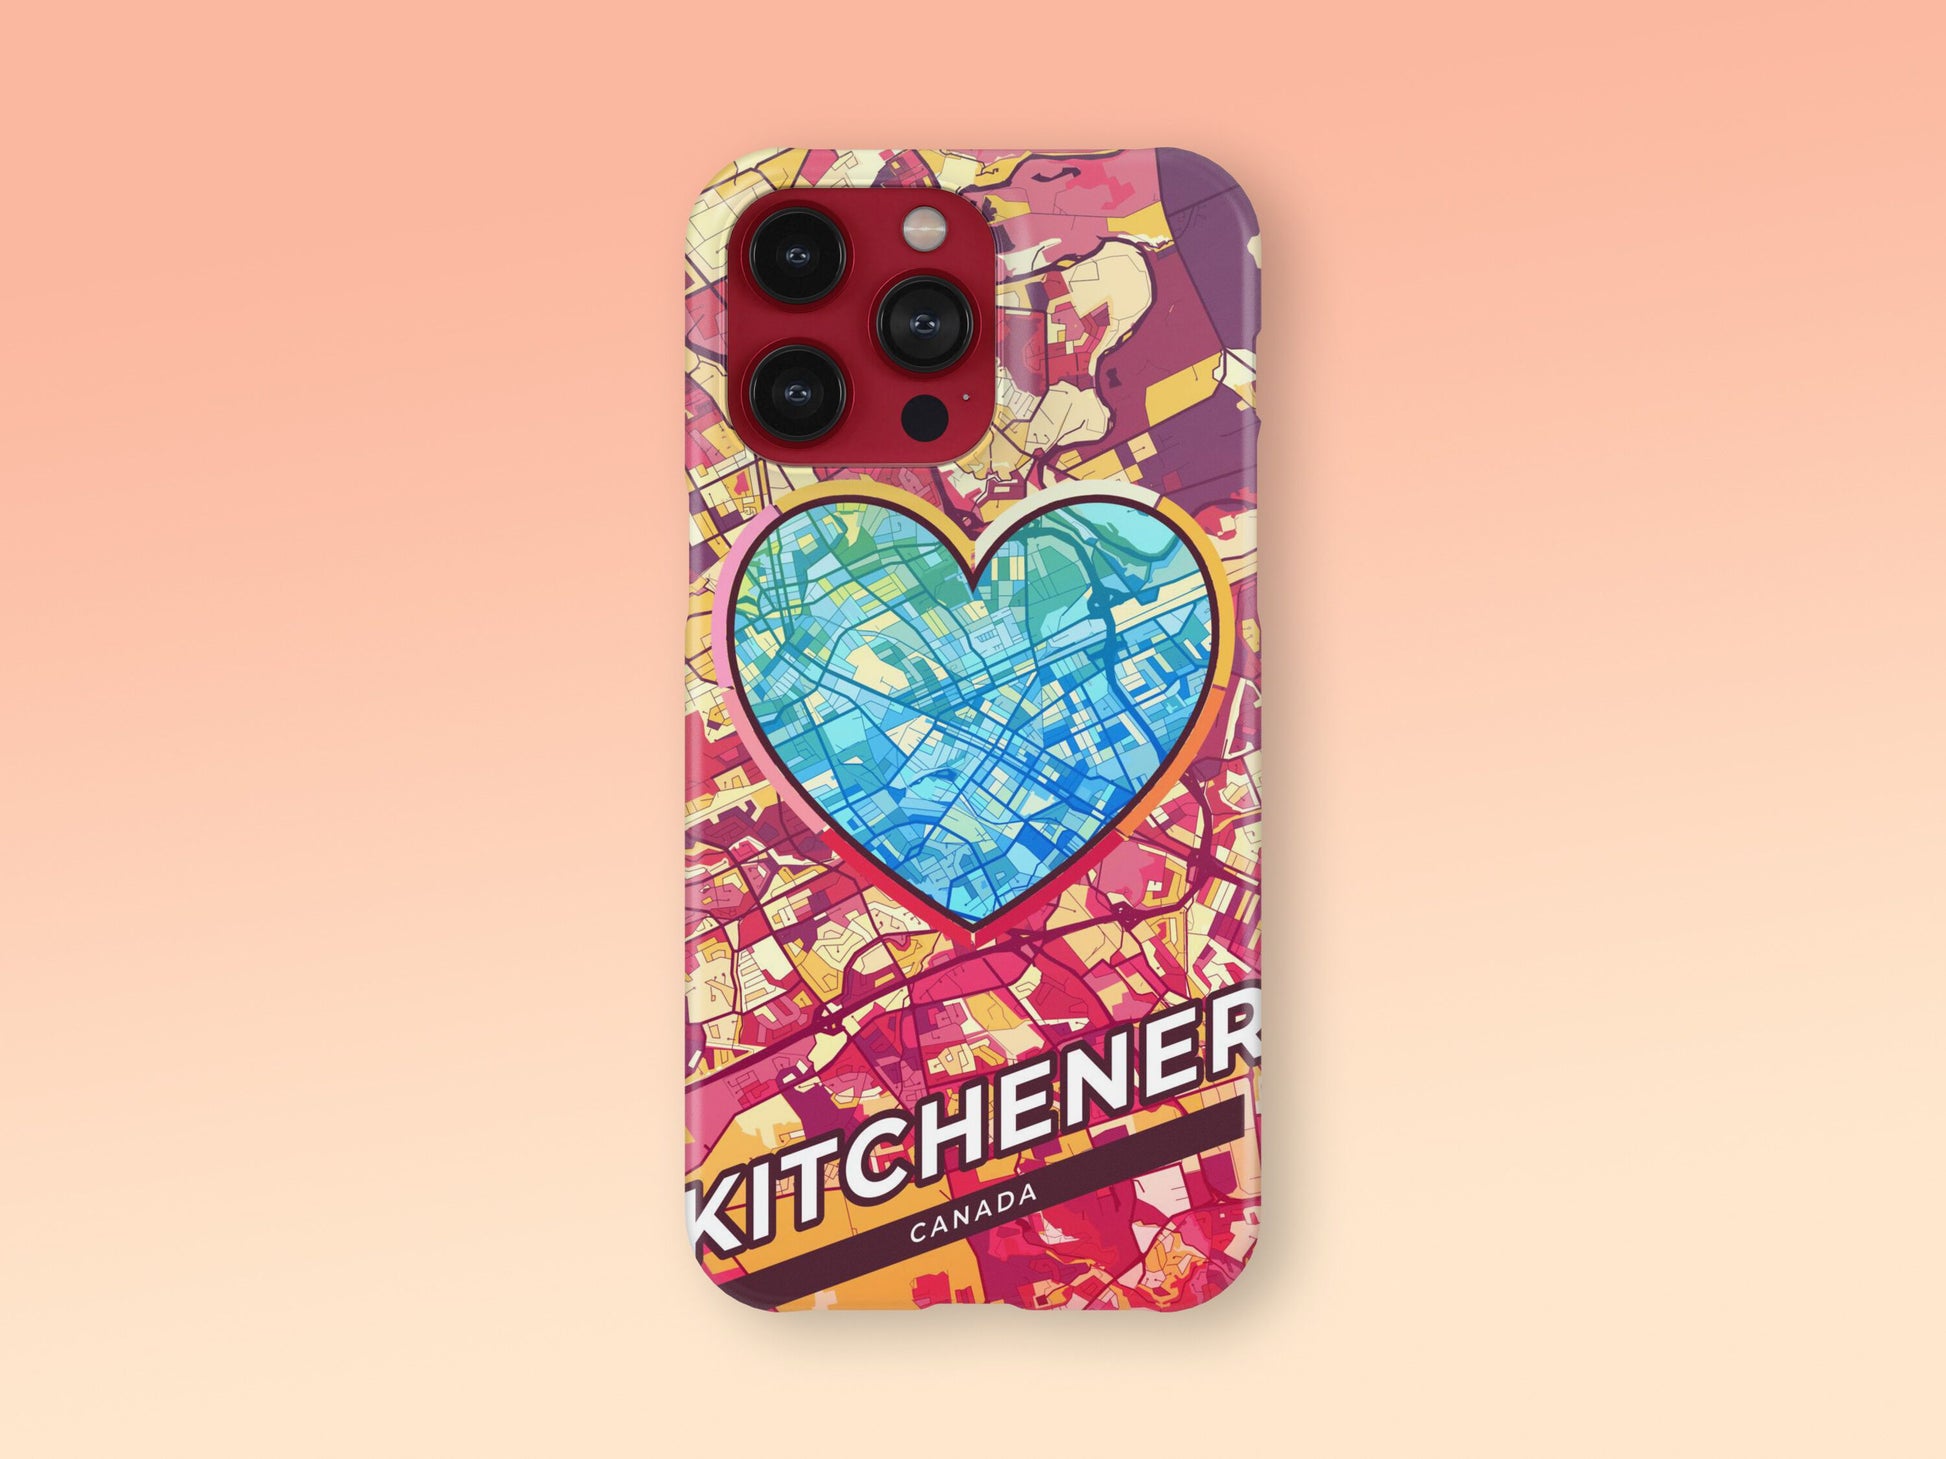 Kitchener Canada slim phone case with colorful icon. Birthday, wedding or housewarming gift. Couple match cases. 2